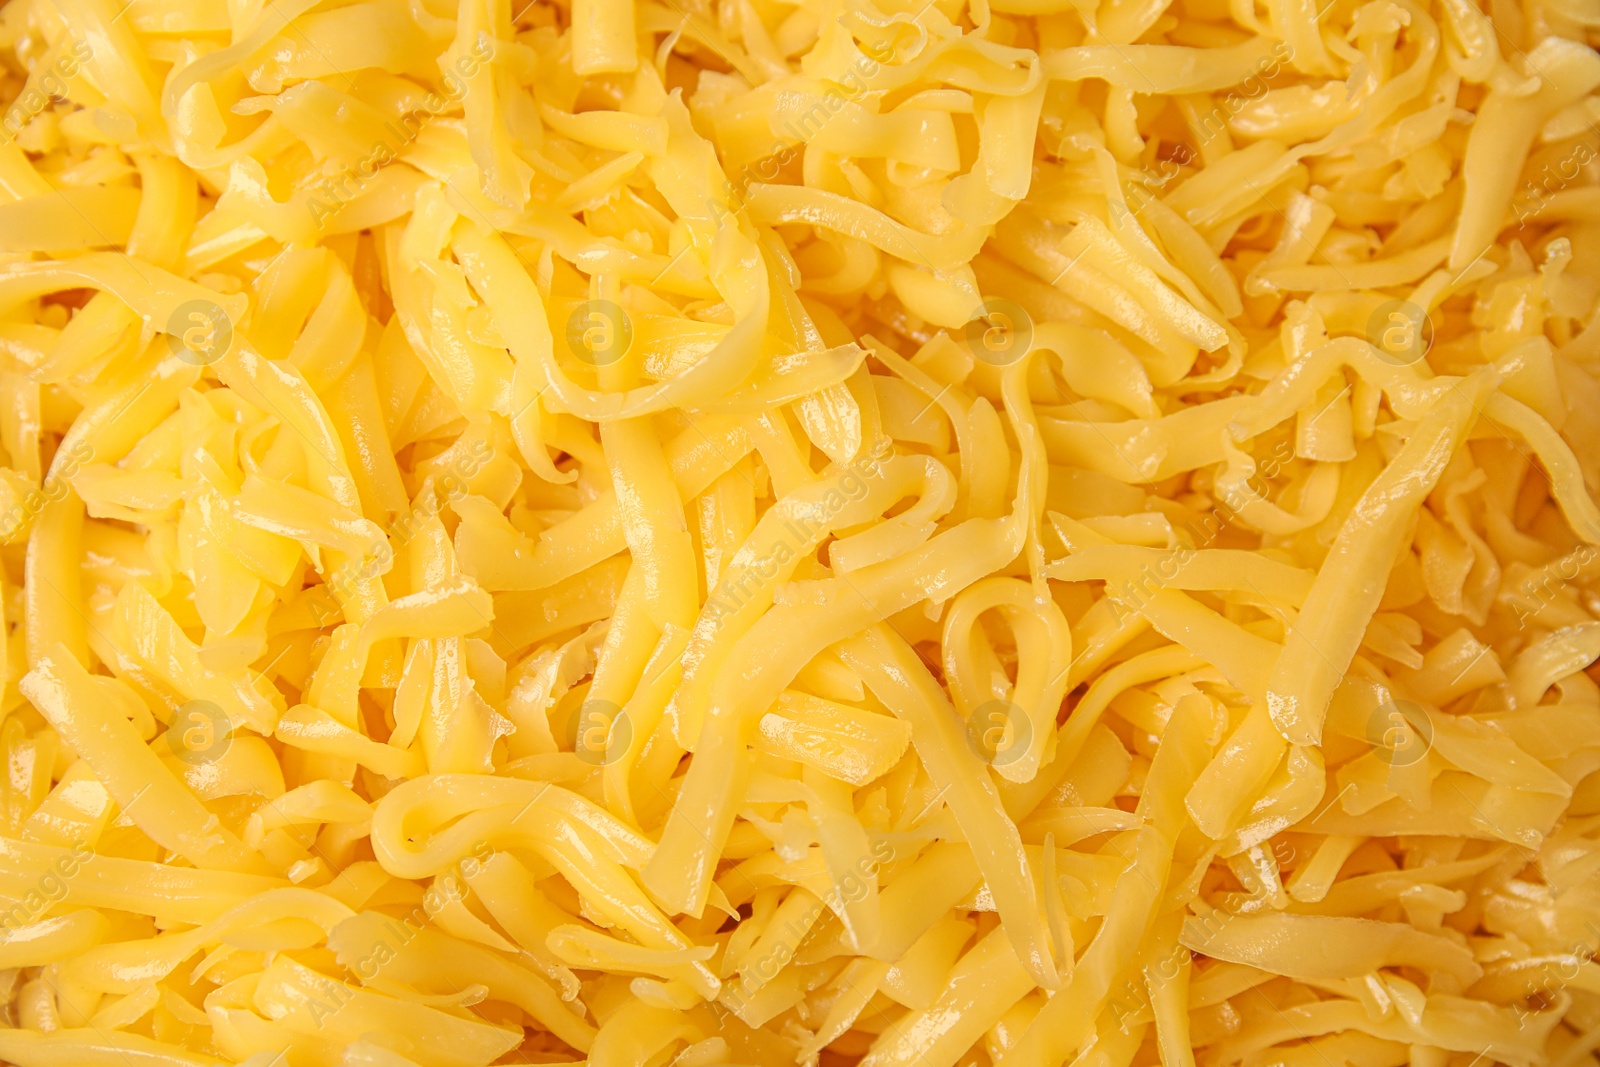 Photo of Delicious grated cheese as background, top view